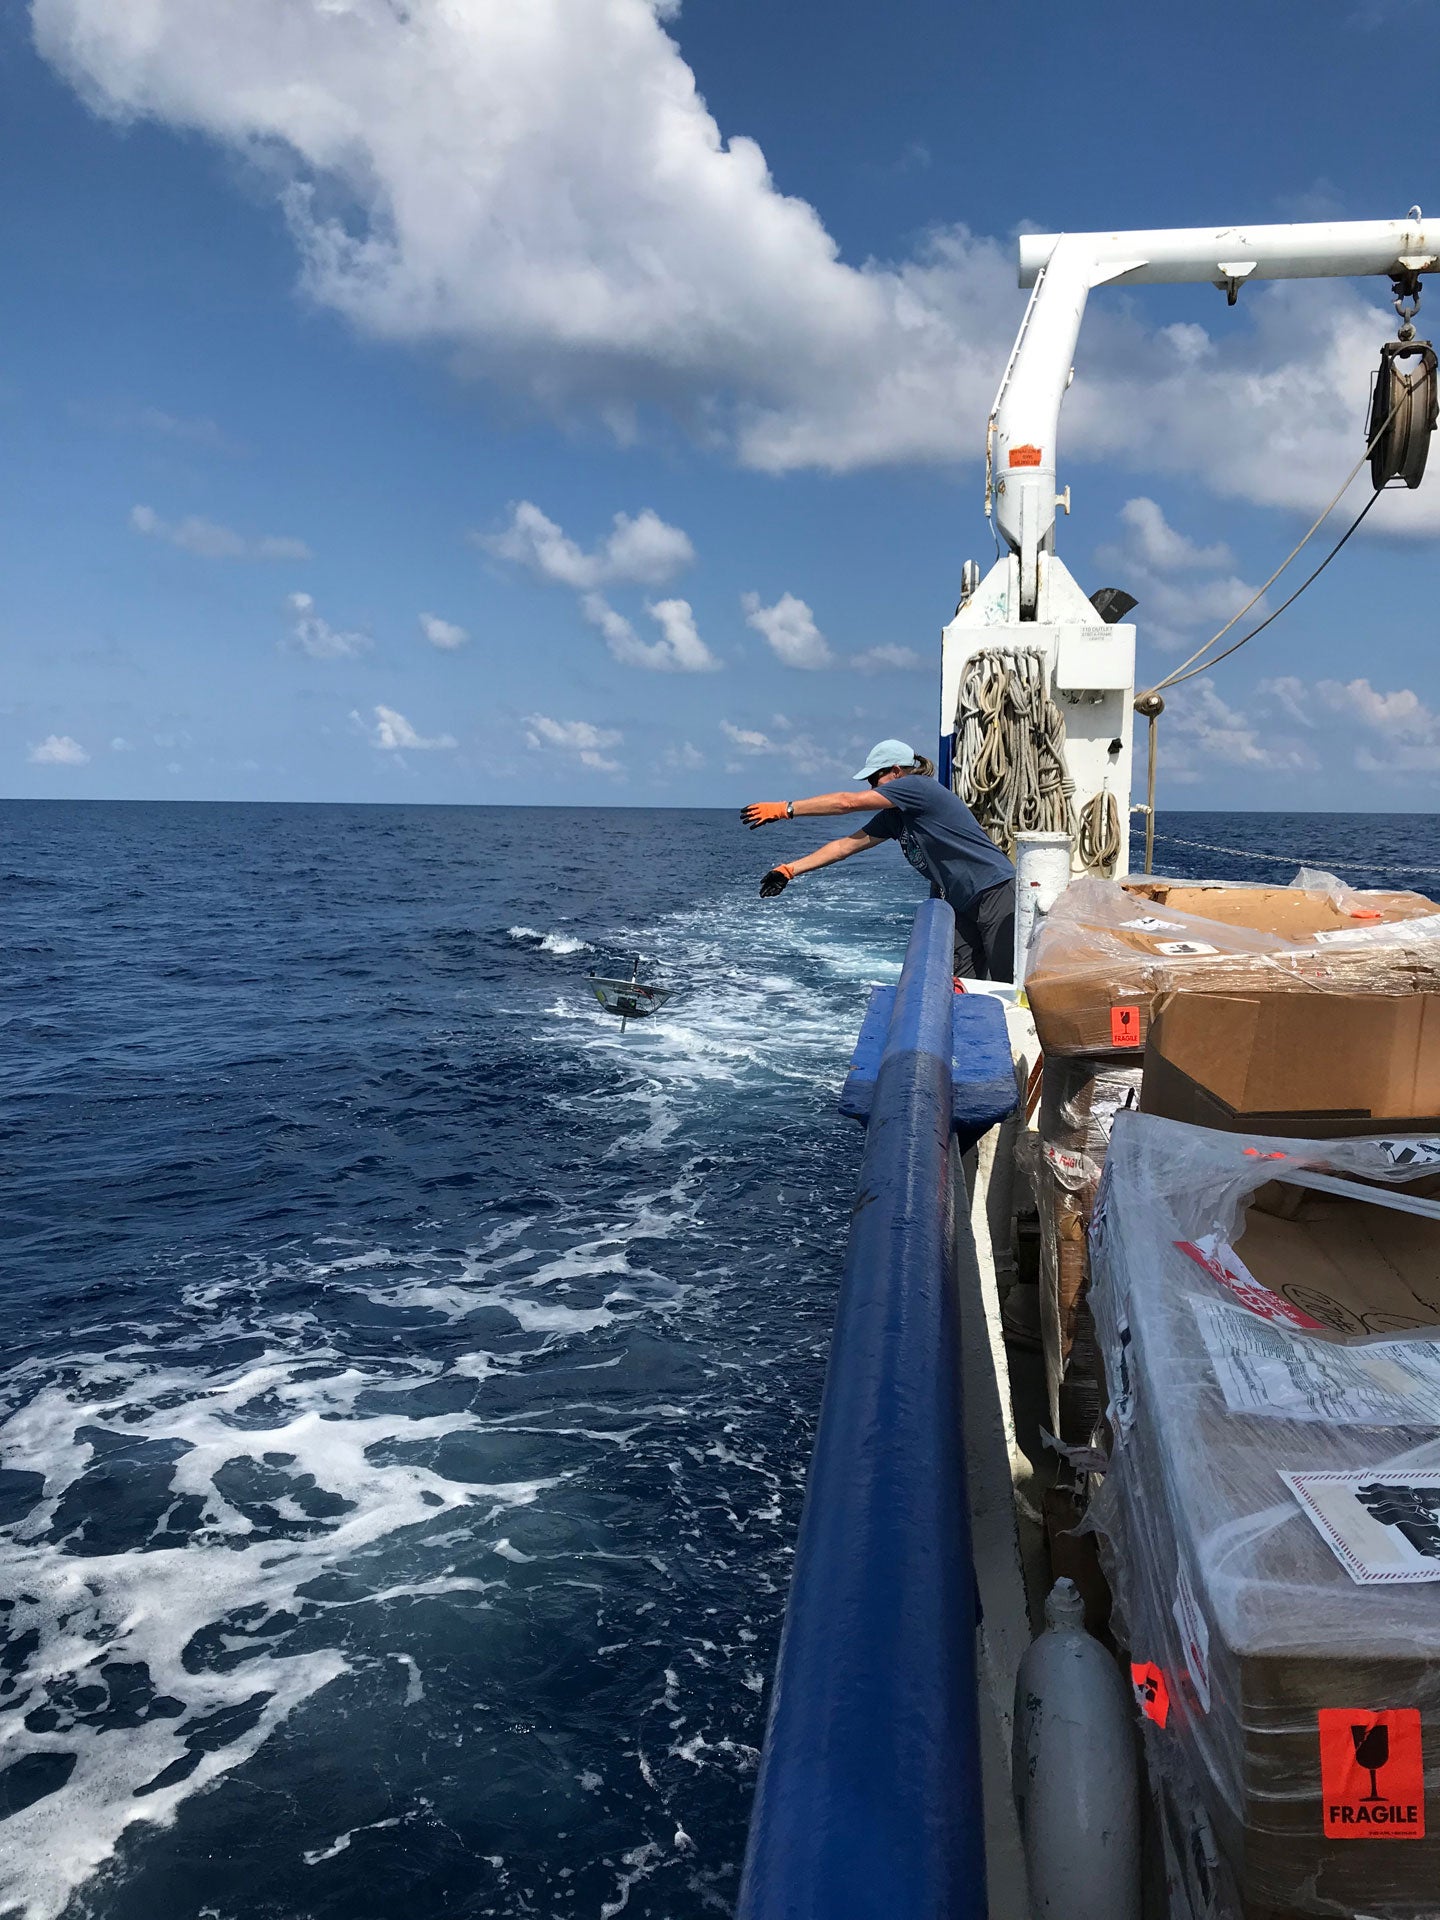 A researcher tosses a round disc into the ocean, a drifter that was deployed on behalf of DARPA.